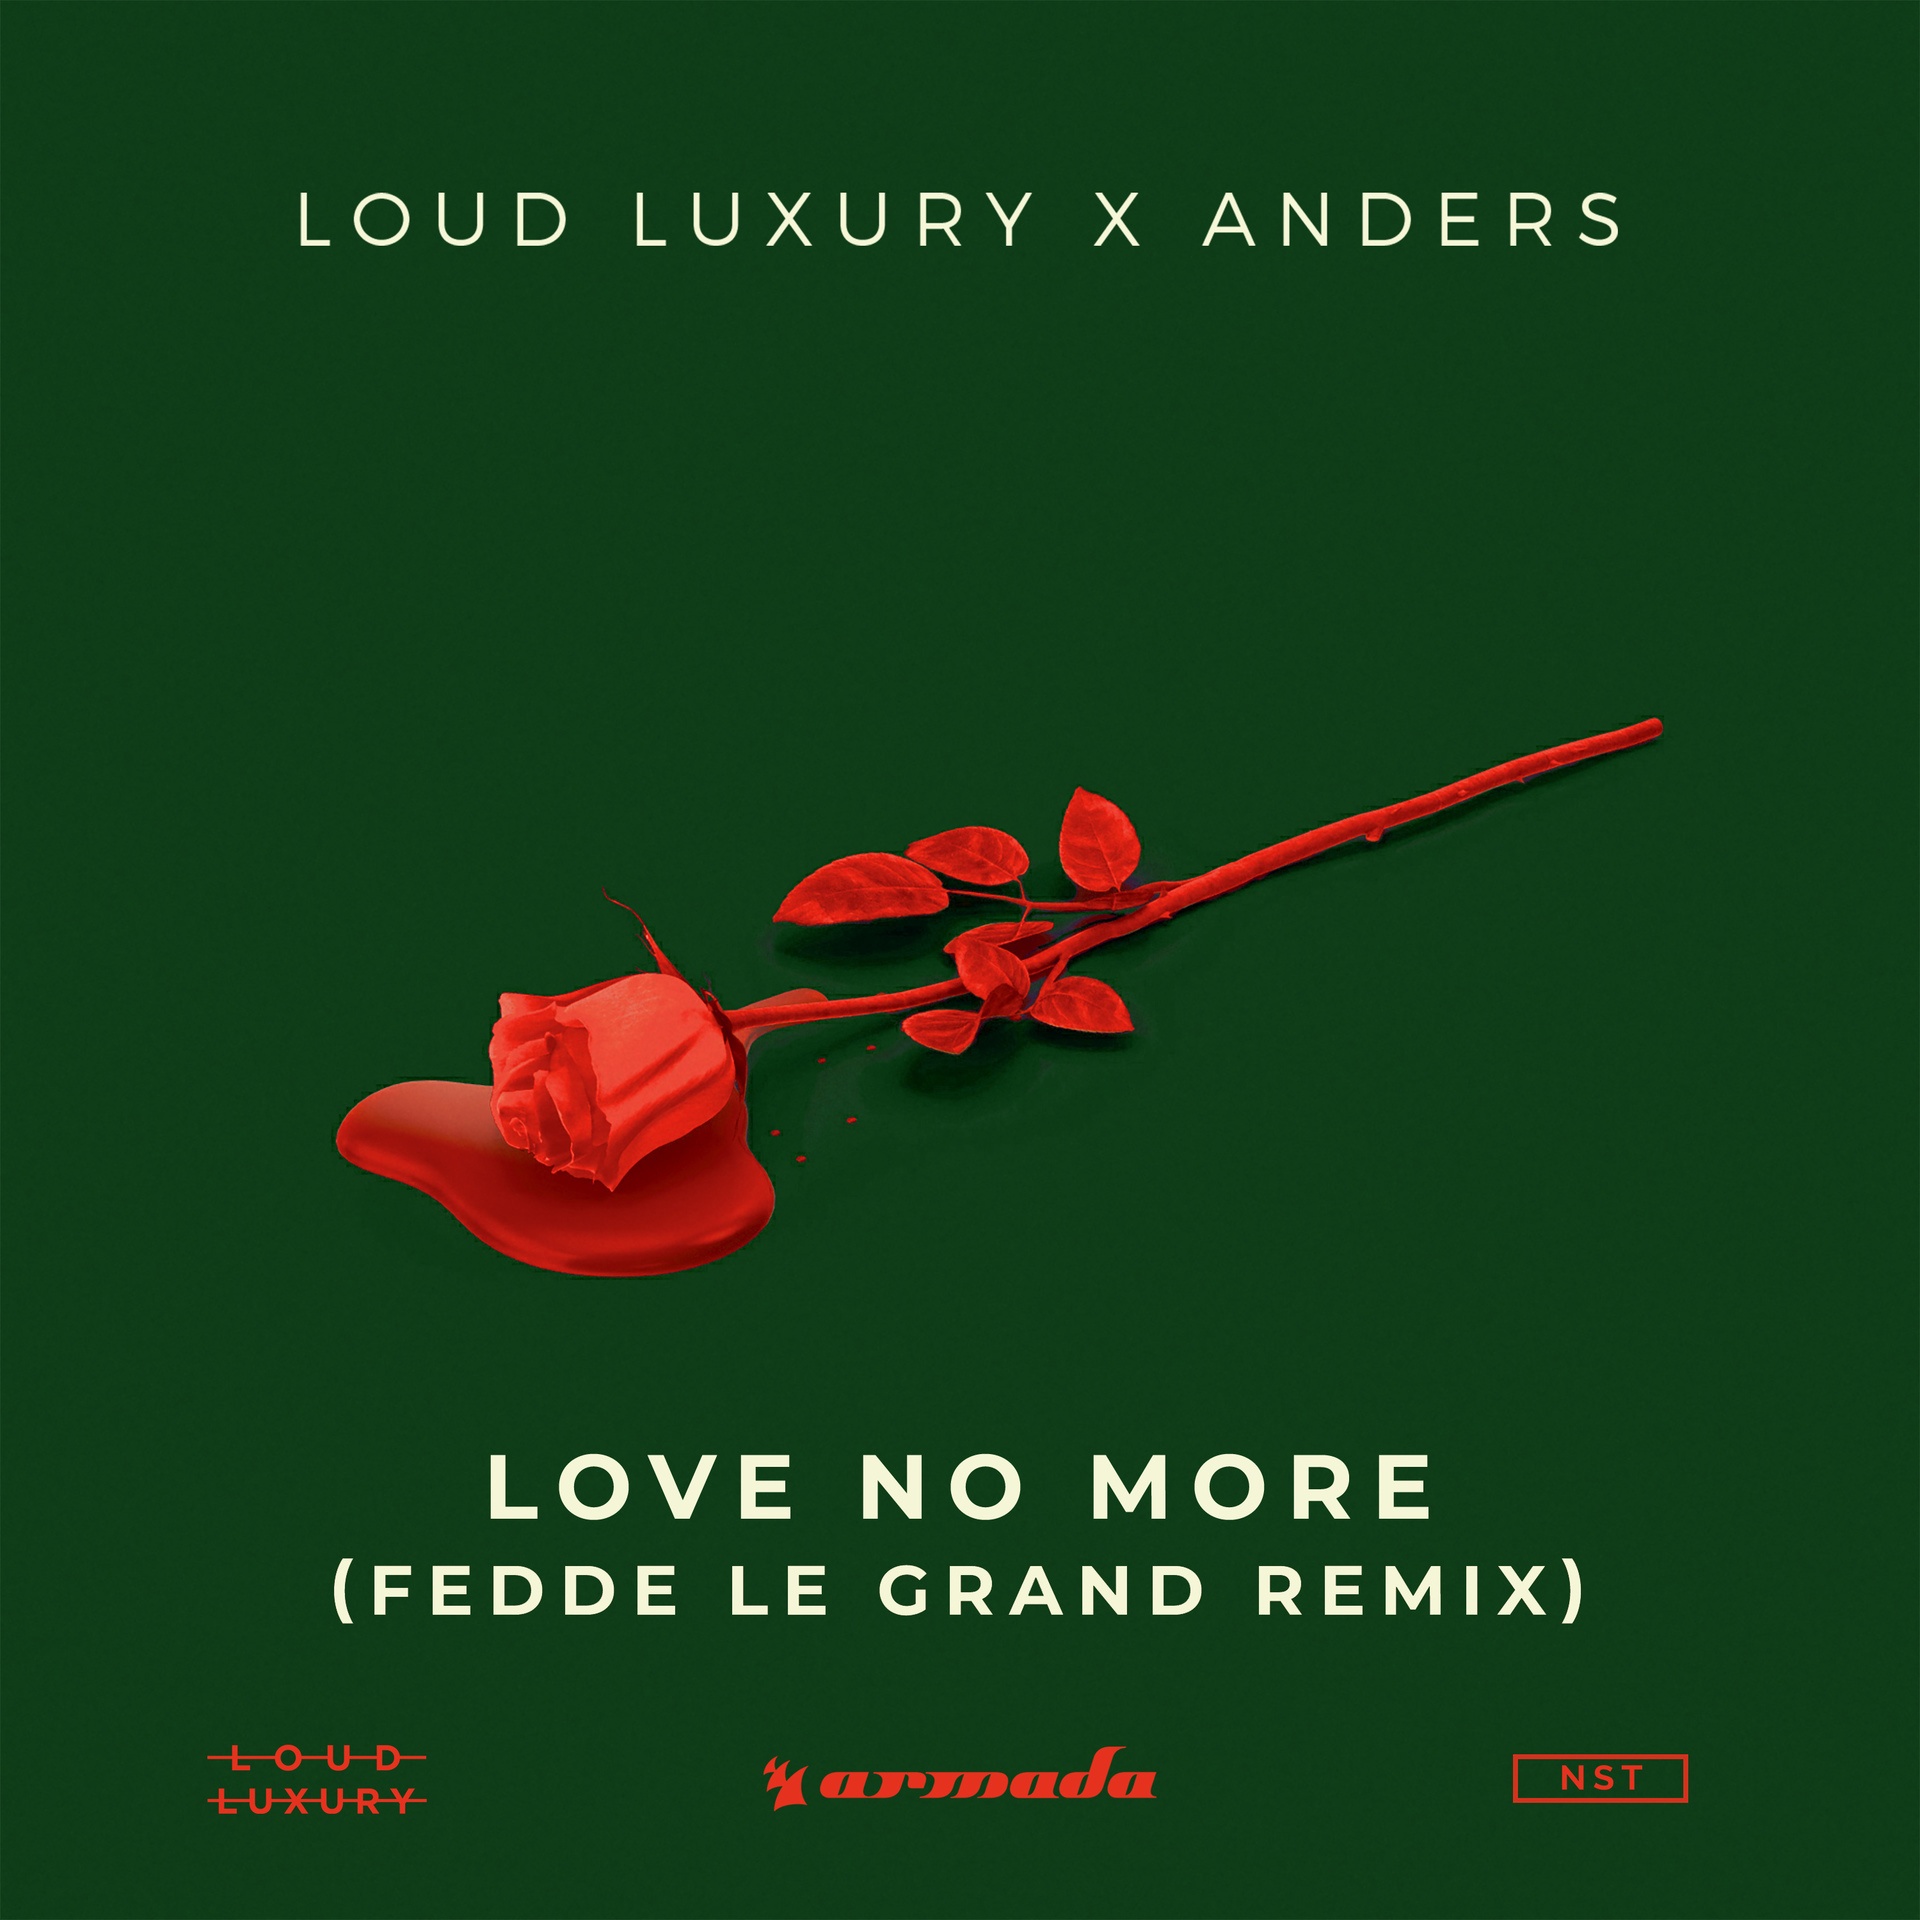 Loud Luxury x anders - Love No More (Fedde Le Grand remix) [OUT NOW ON ARMADA MUSIC]